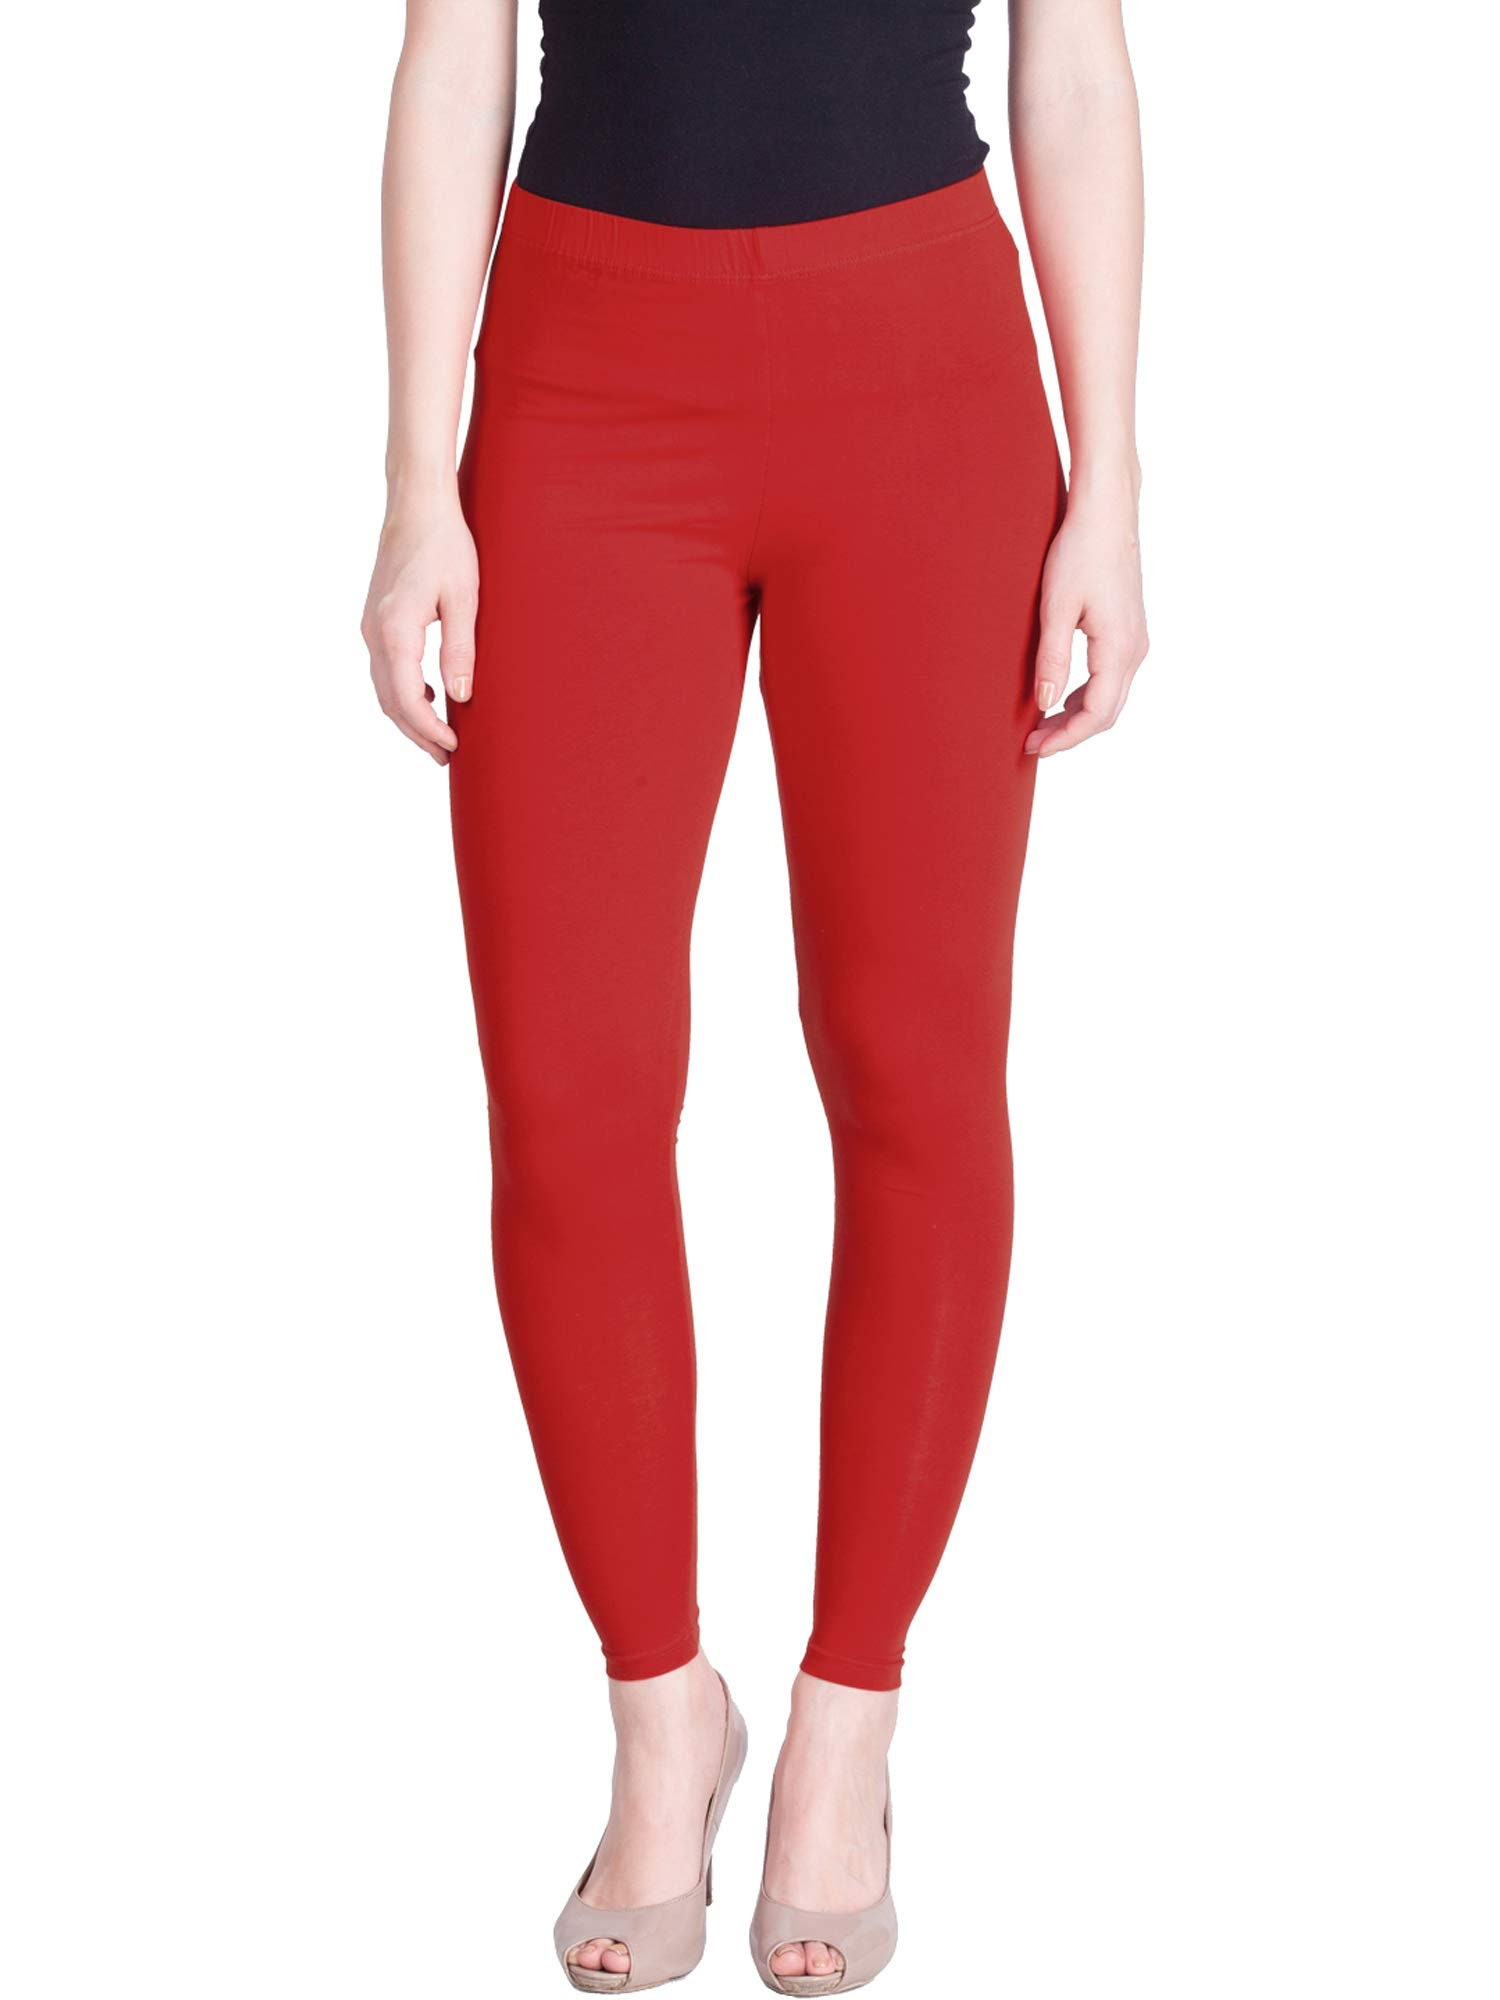 Women Ankle Length Leggings Colors Red Free Size Free Shipping